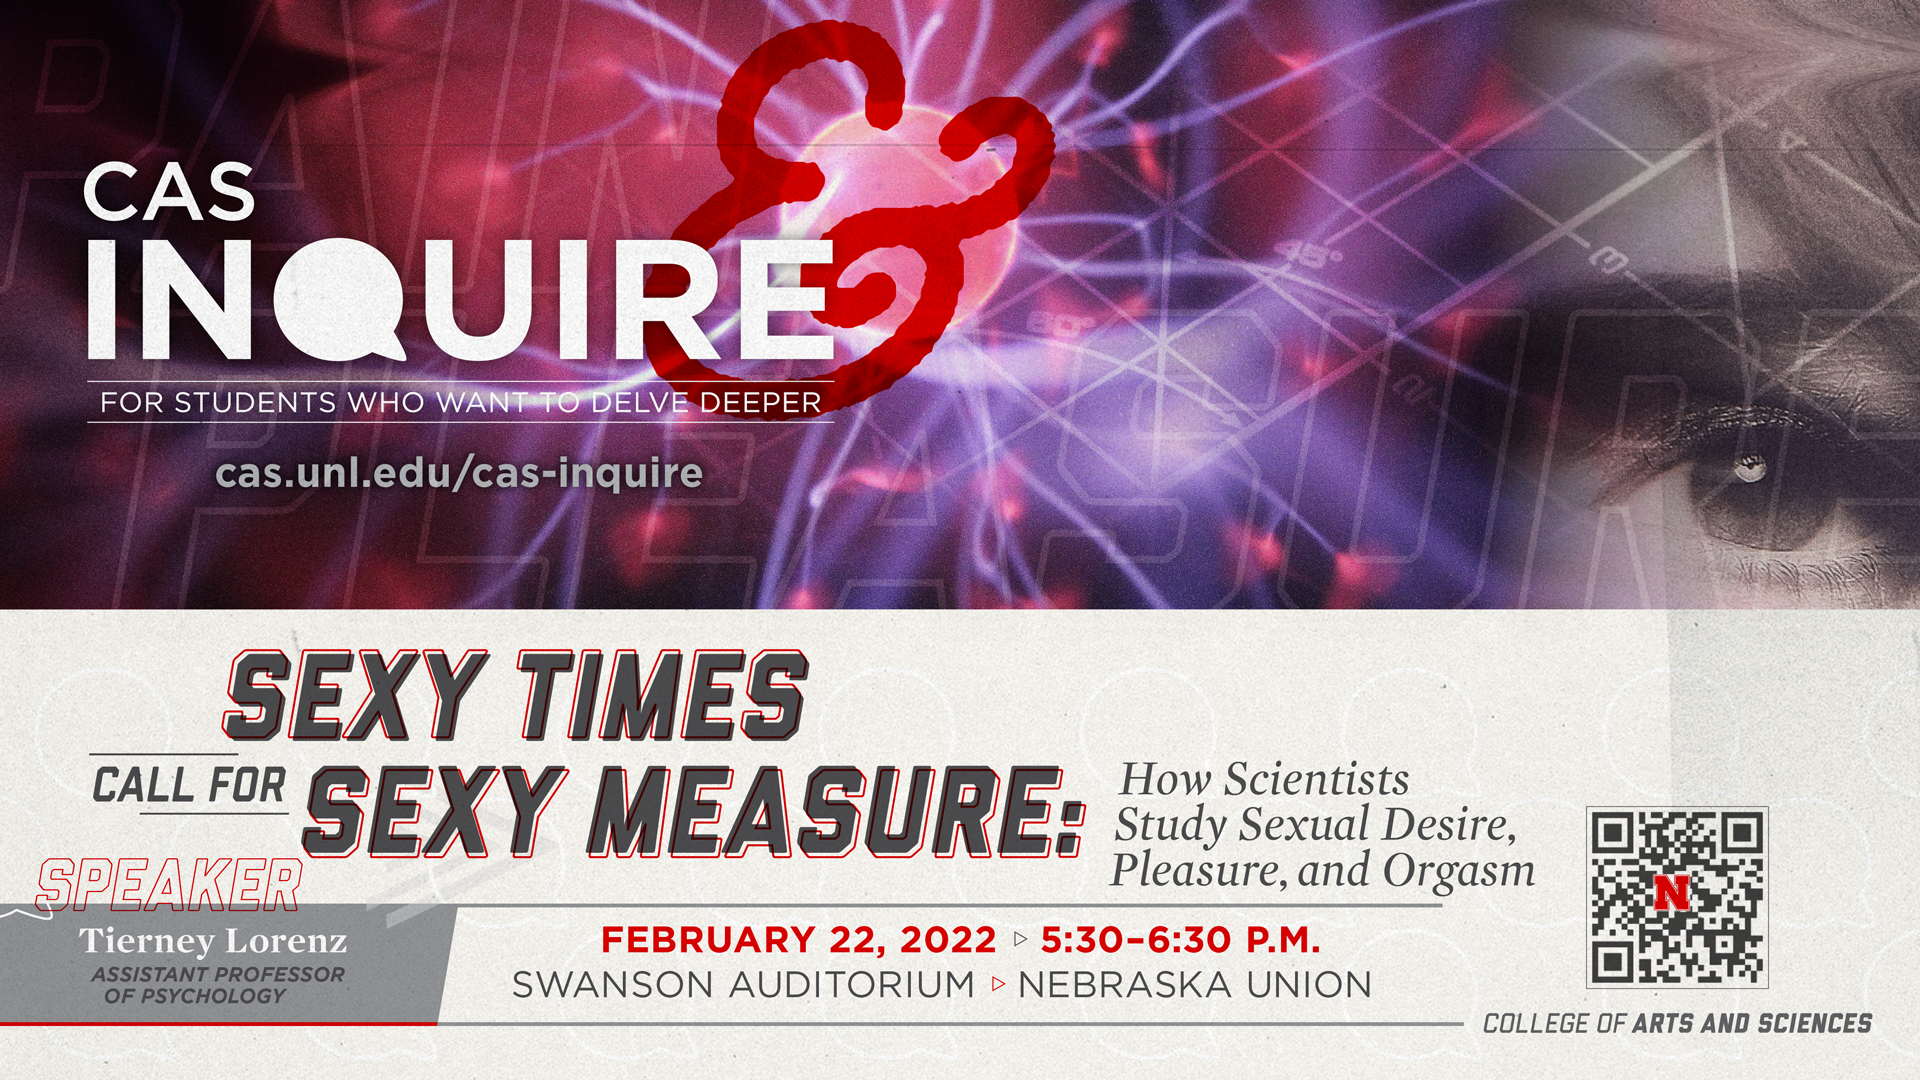 Lorenz's talk for "Pain and Pleasure" series is Feb. 22